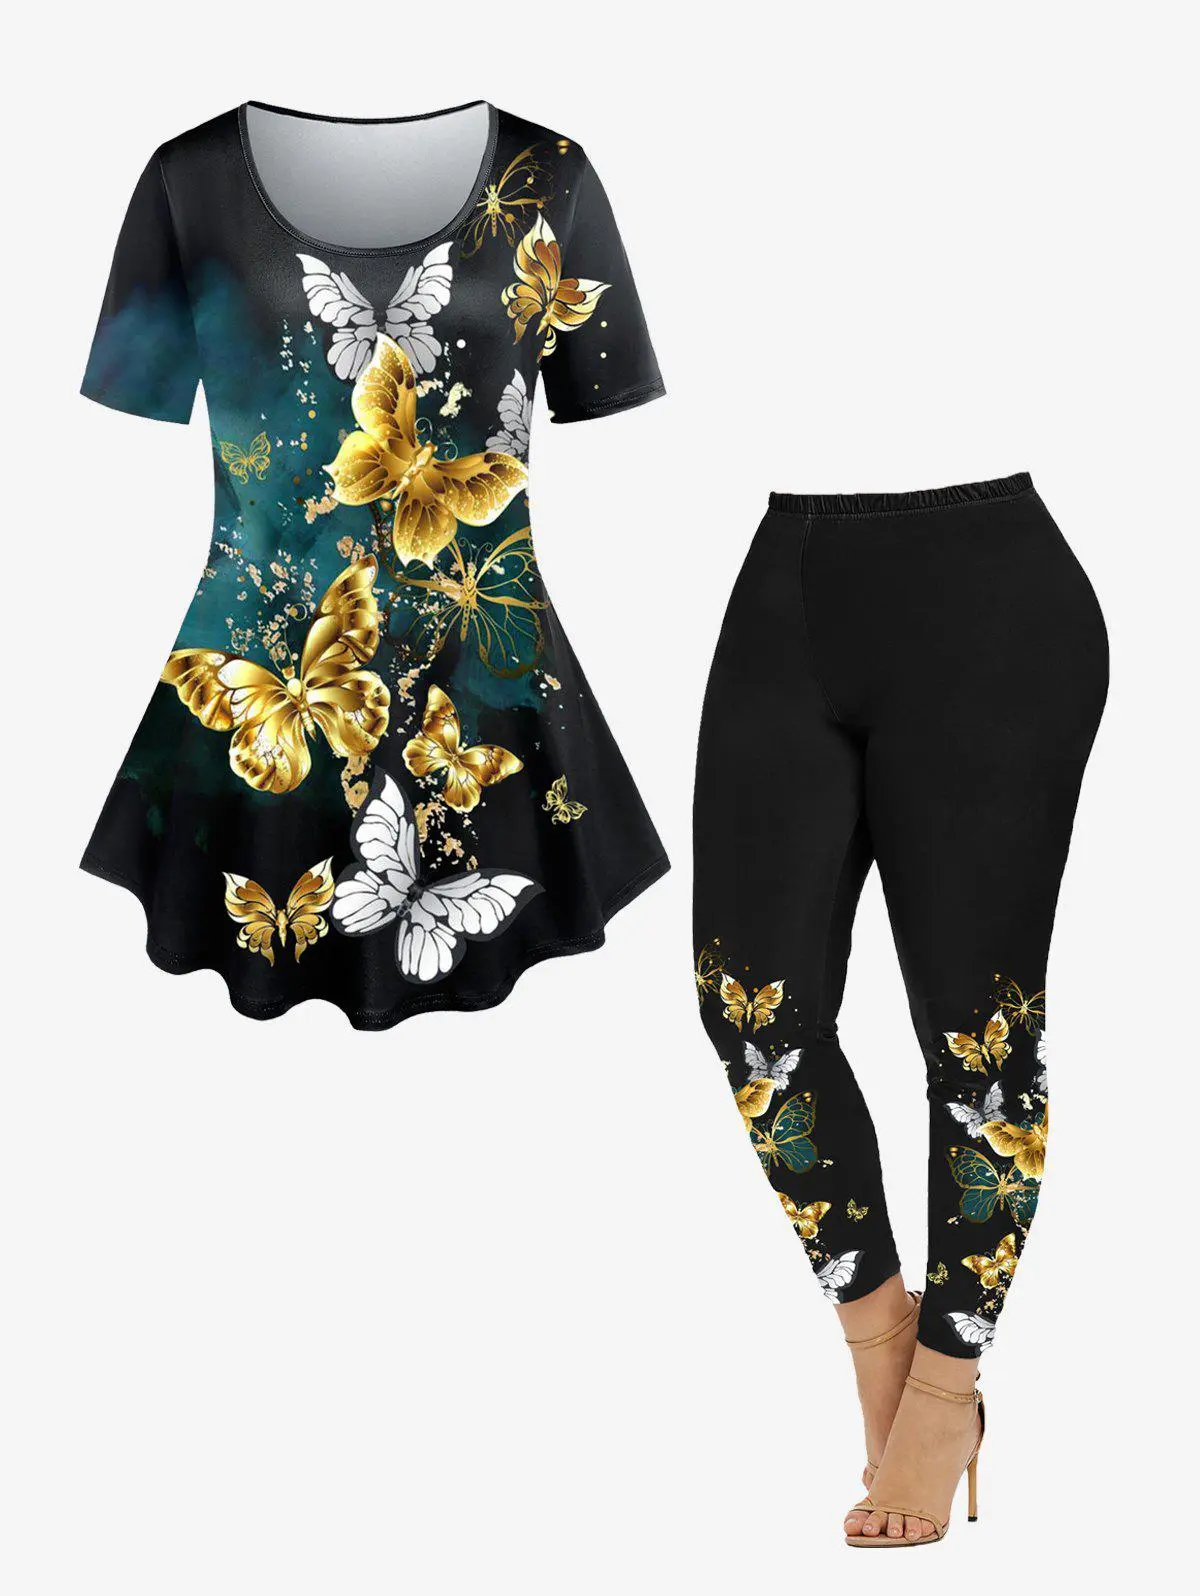 Butterfly Print Tee and Leggings Plus Size Summer Outfit